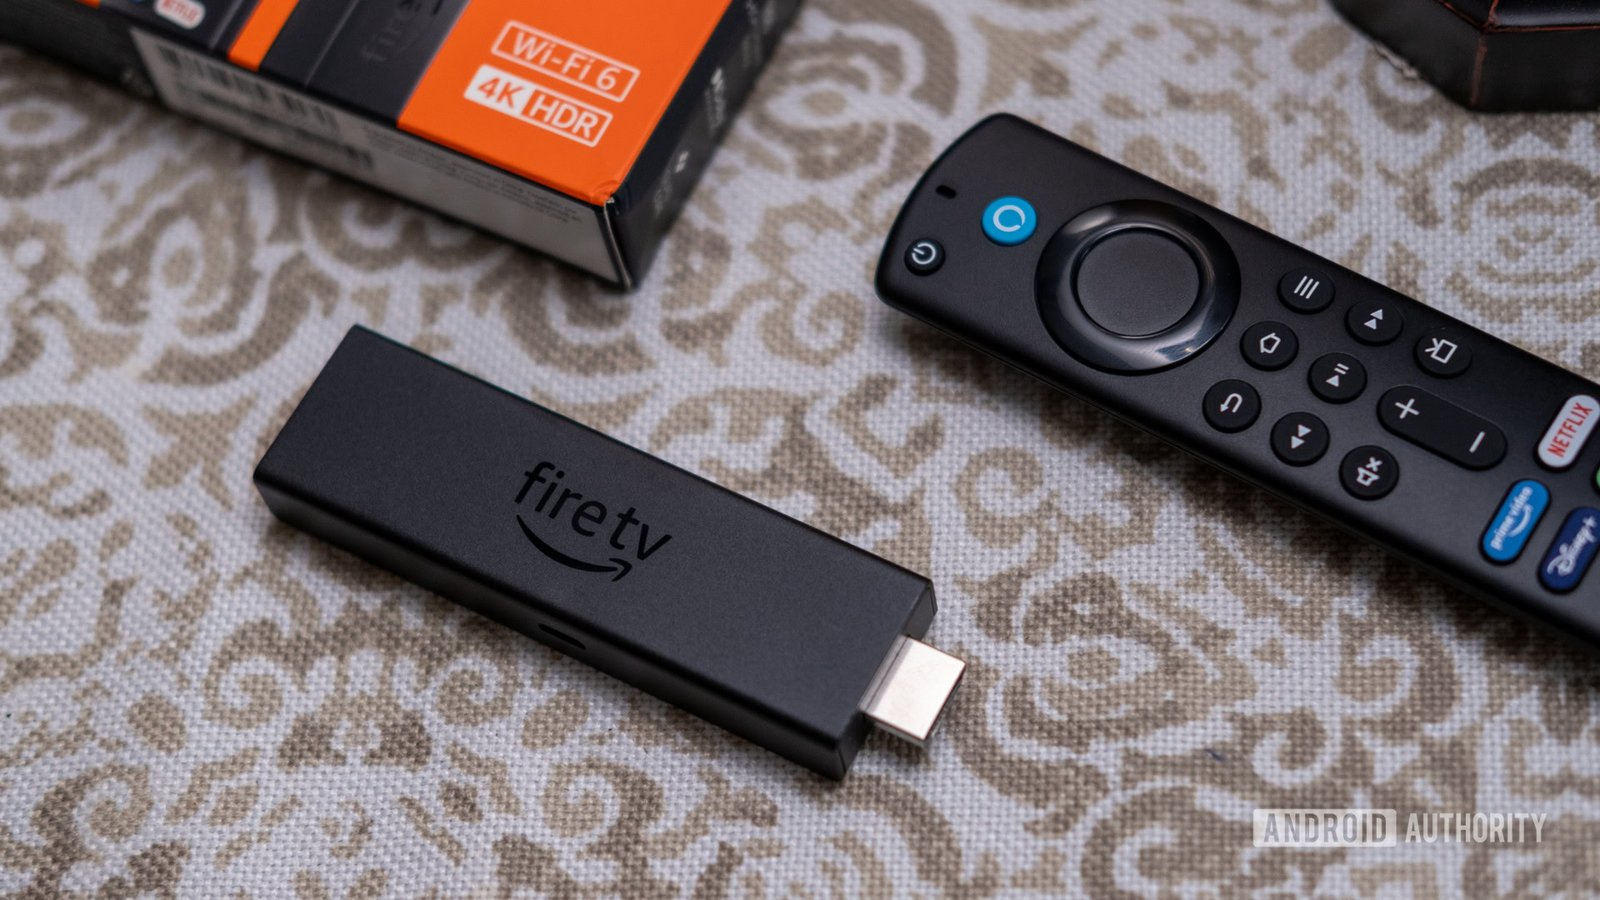 Amazon Fire TV devices will now play video ads before your screensaver